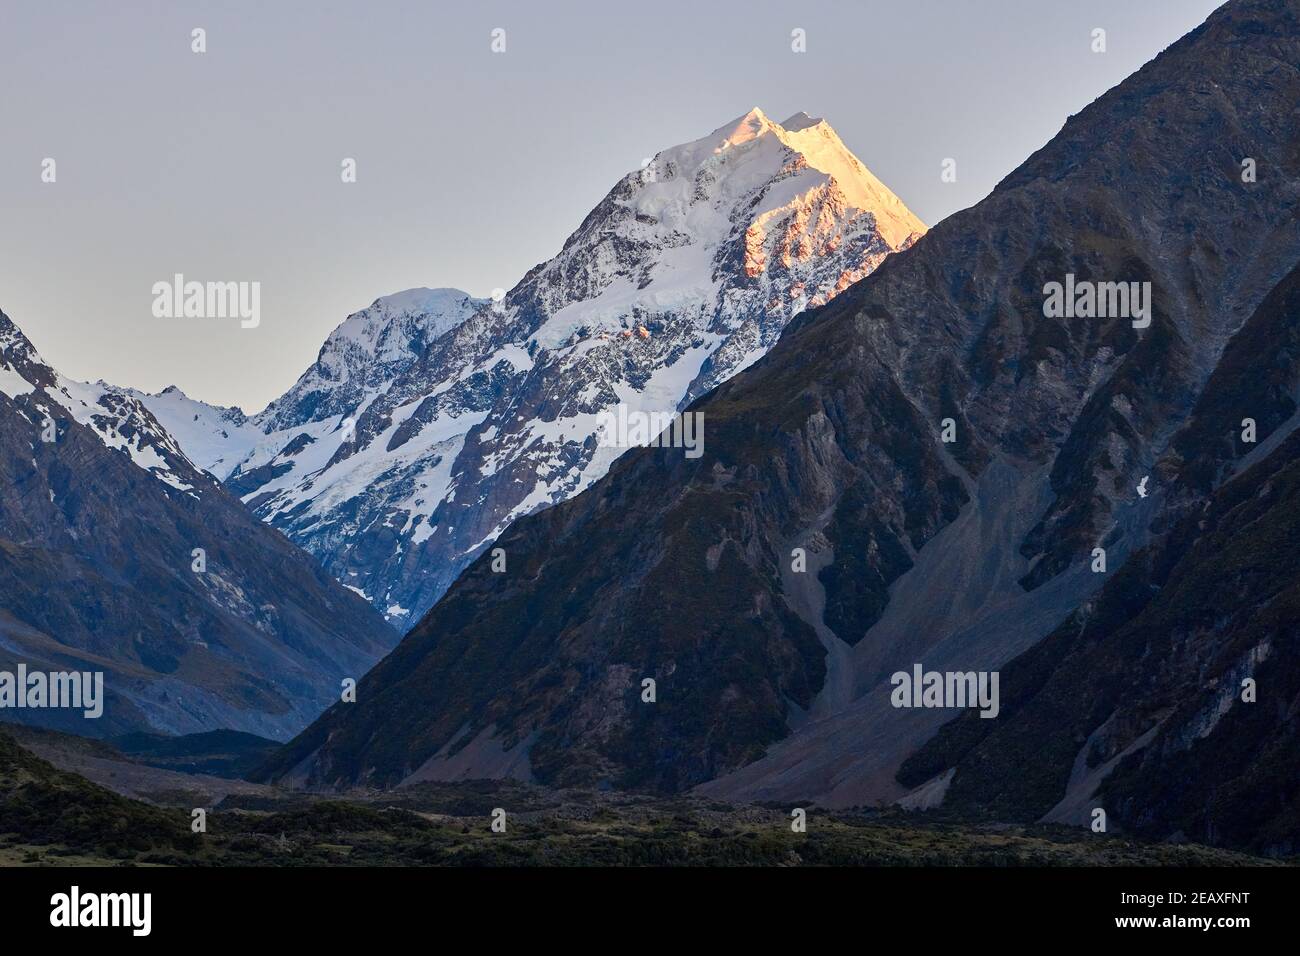 Aoraki Mt Cook at sunrise, New Zealand's tallest mountain, with Mt Wakefield in the foreground Stock Photo